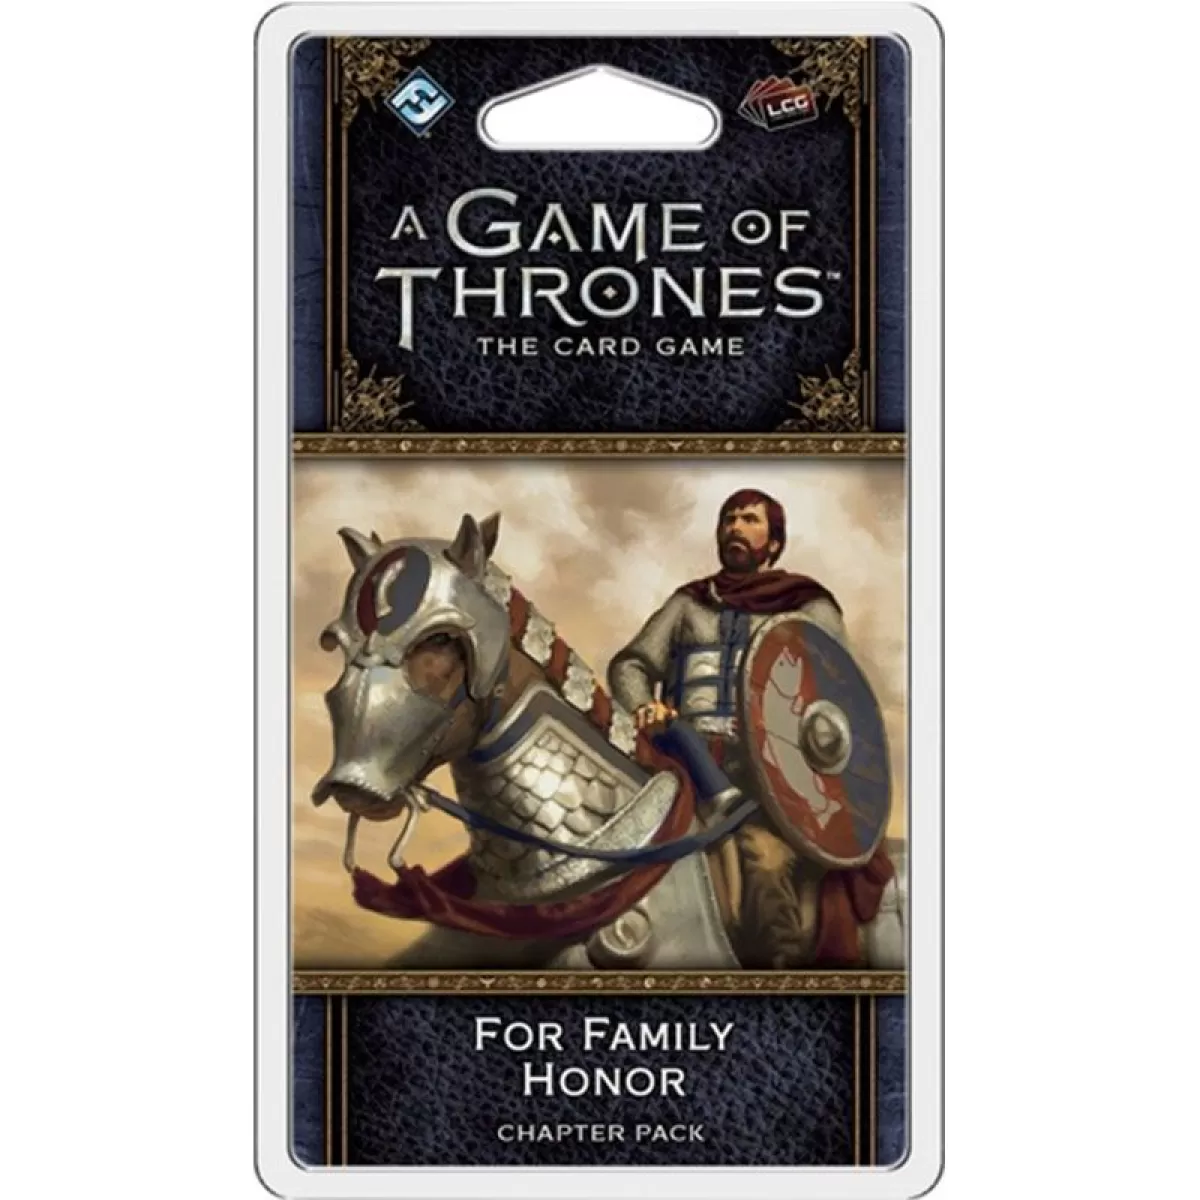 A game of thrones - for family honor - chapter pack 3